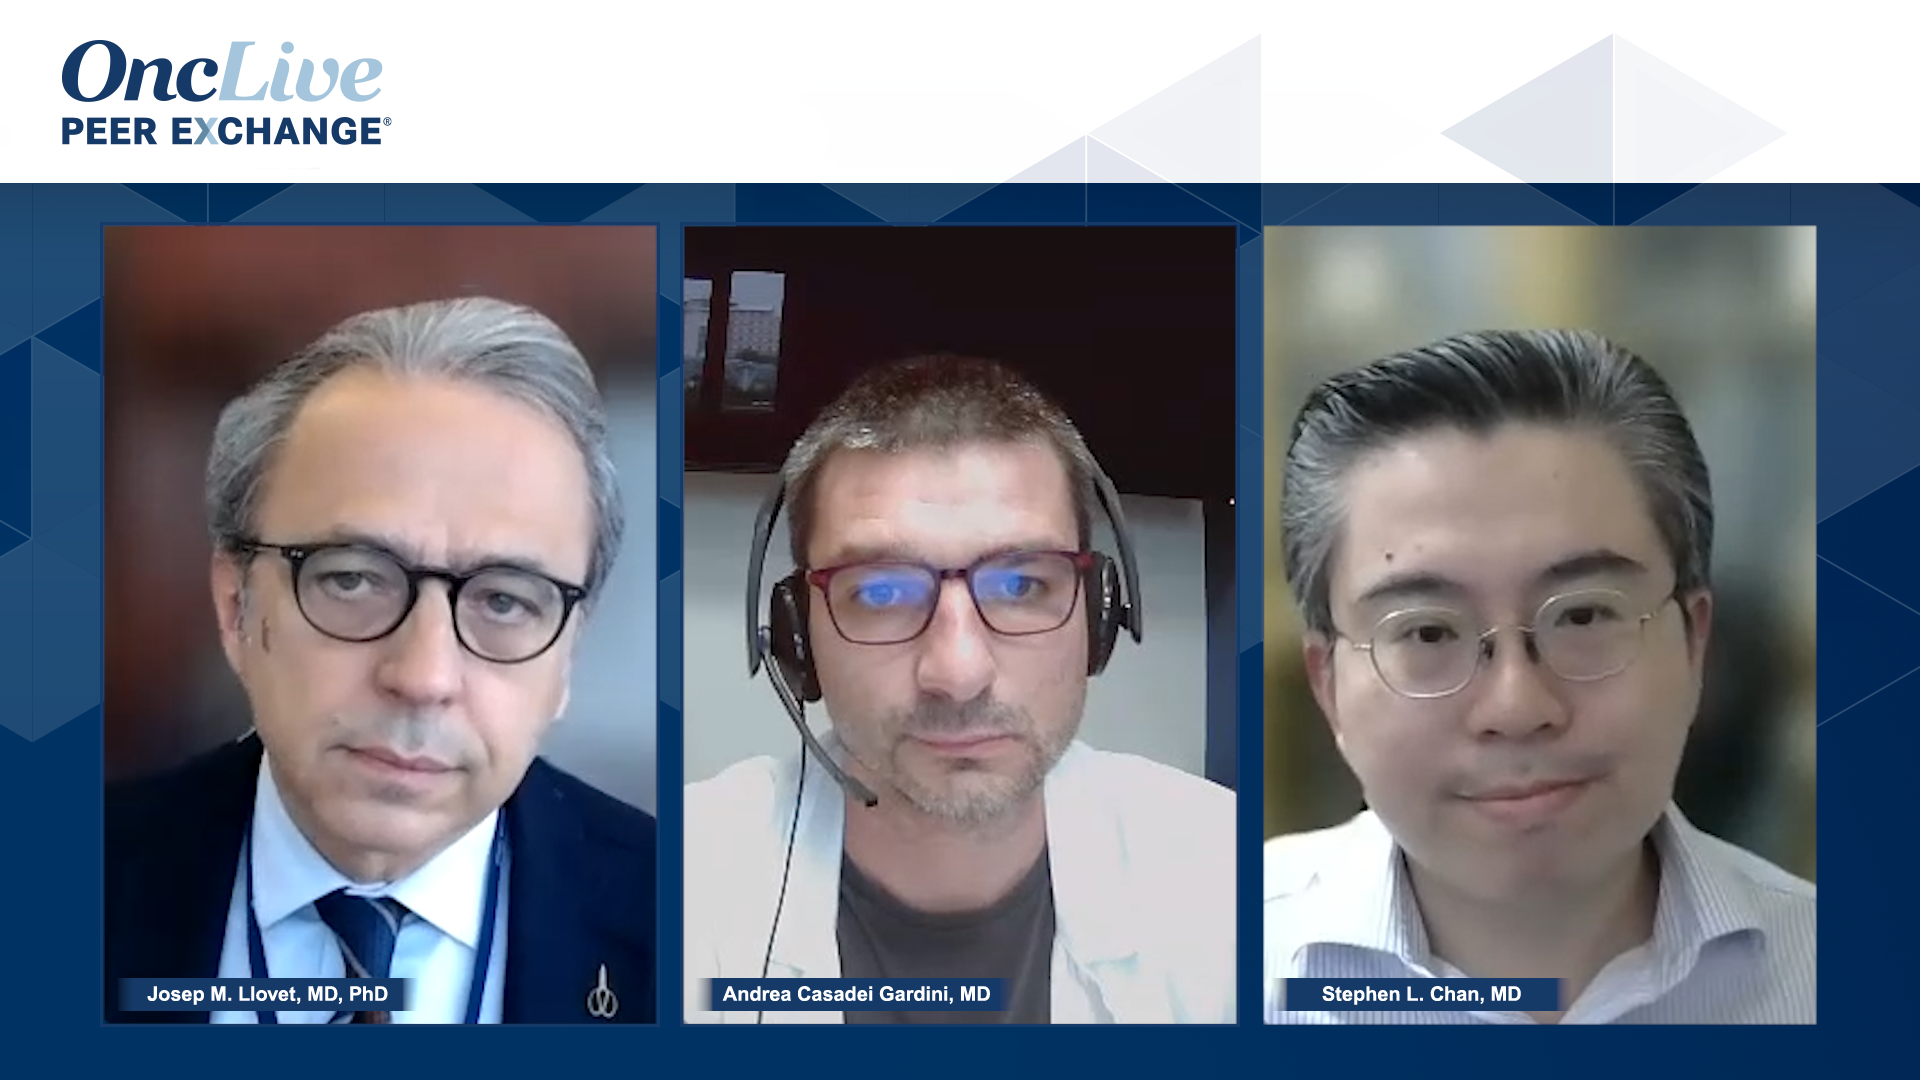 Emerging Treatment Considerations in Hepatocellular Carcinoma: An Expert Case-based Discussion